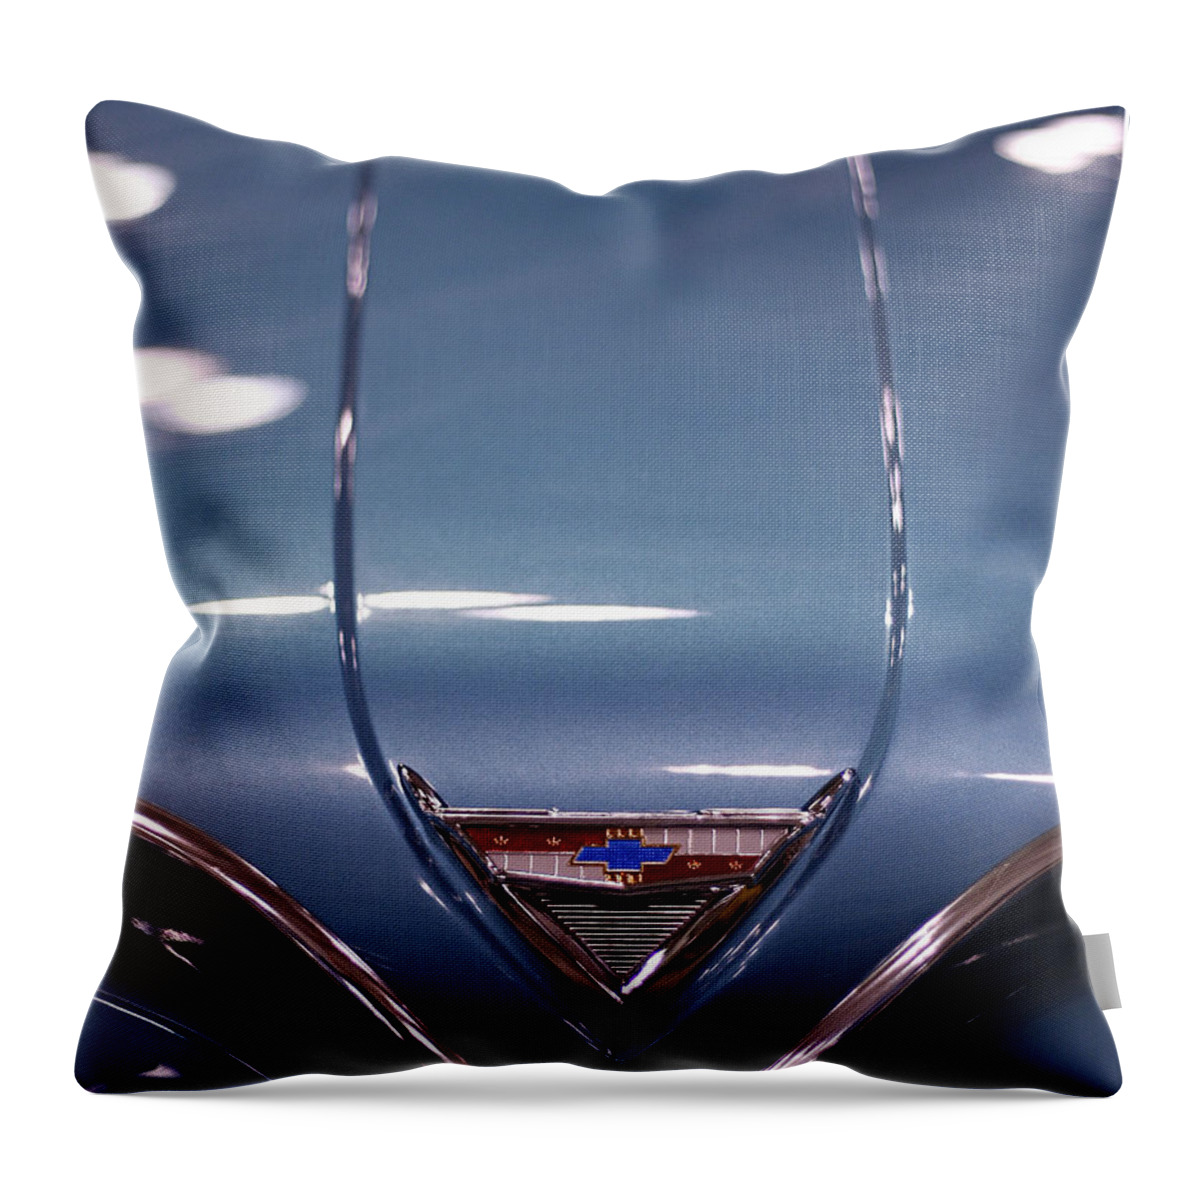 Impala Throw Pillow featuring the photograph Classic Chevy Impala Trunk by Kristia Adams